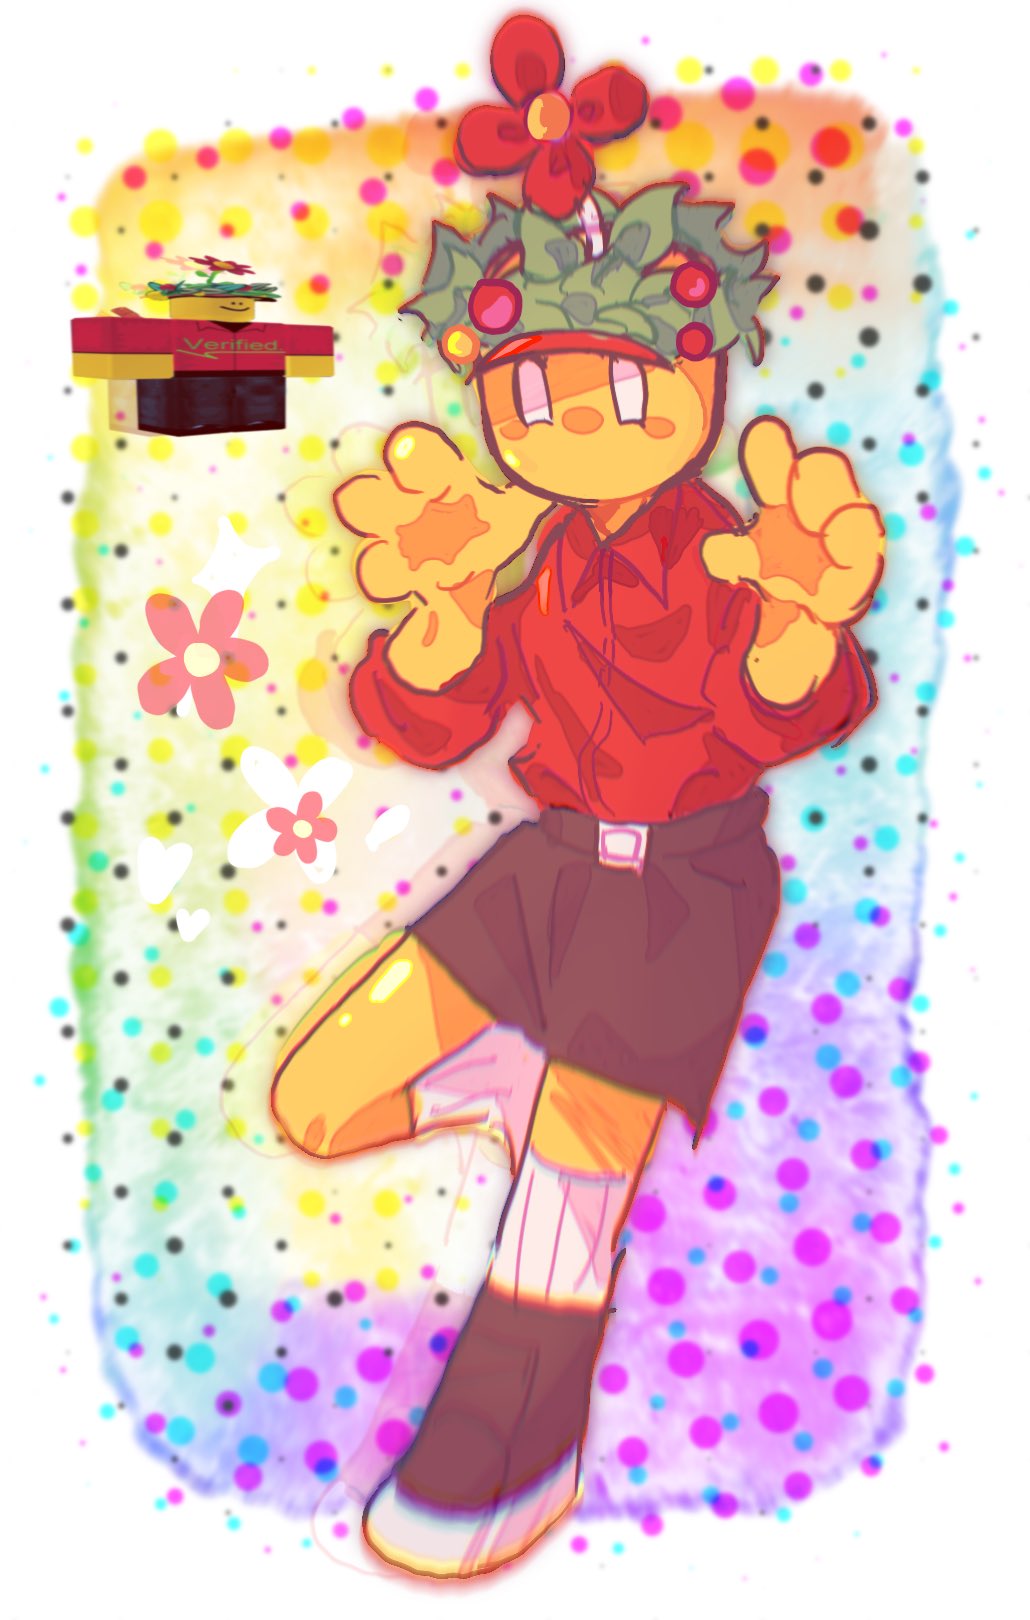 Mr_p 🜏 . on X: Roblox girl noobs #robloxart  / X